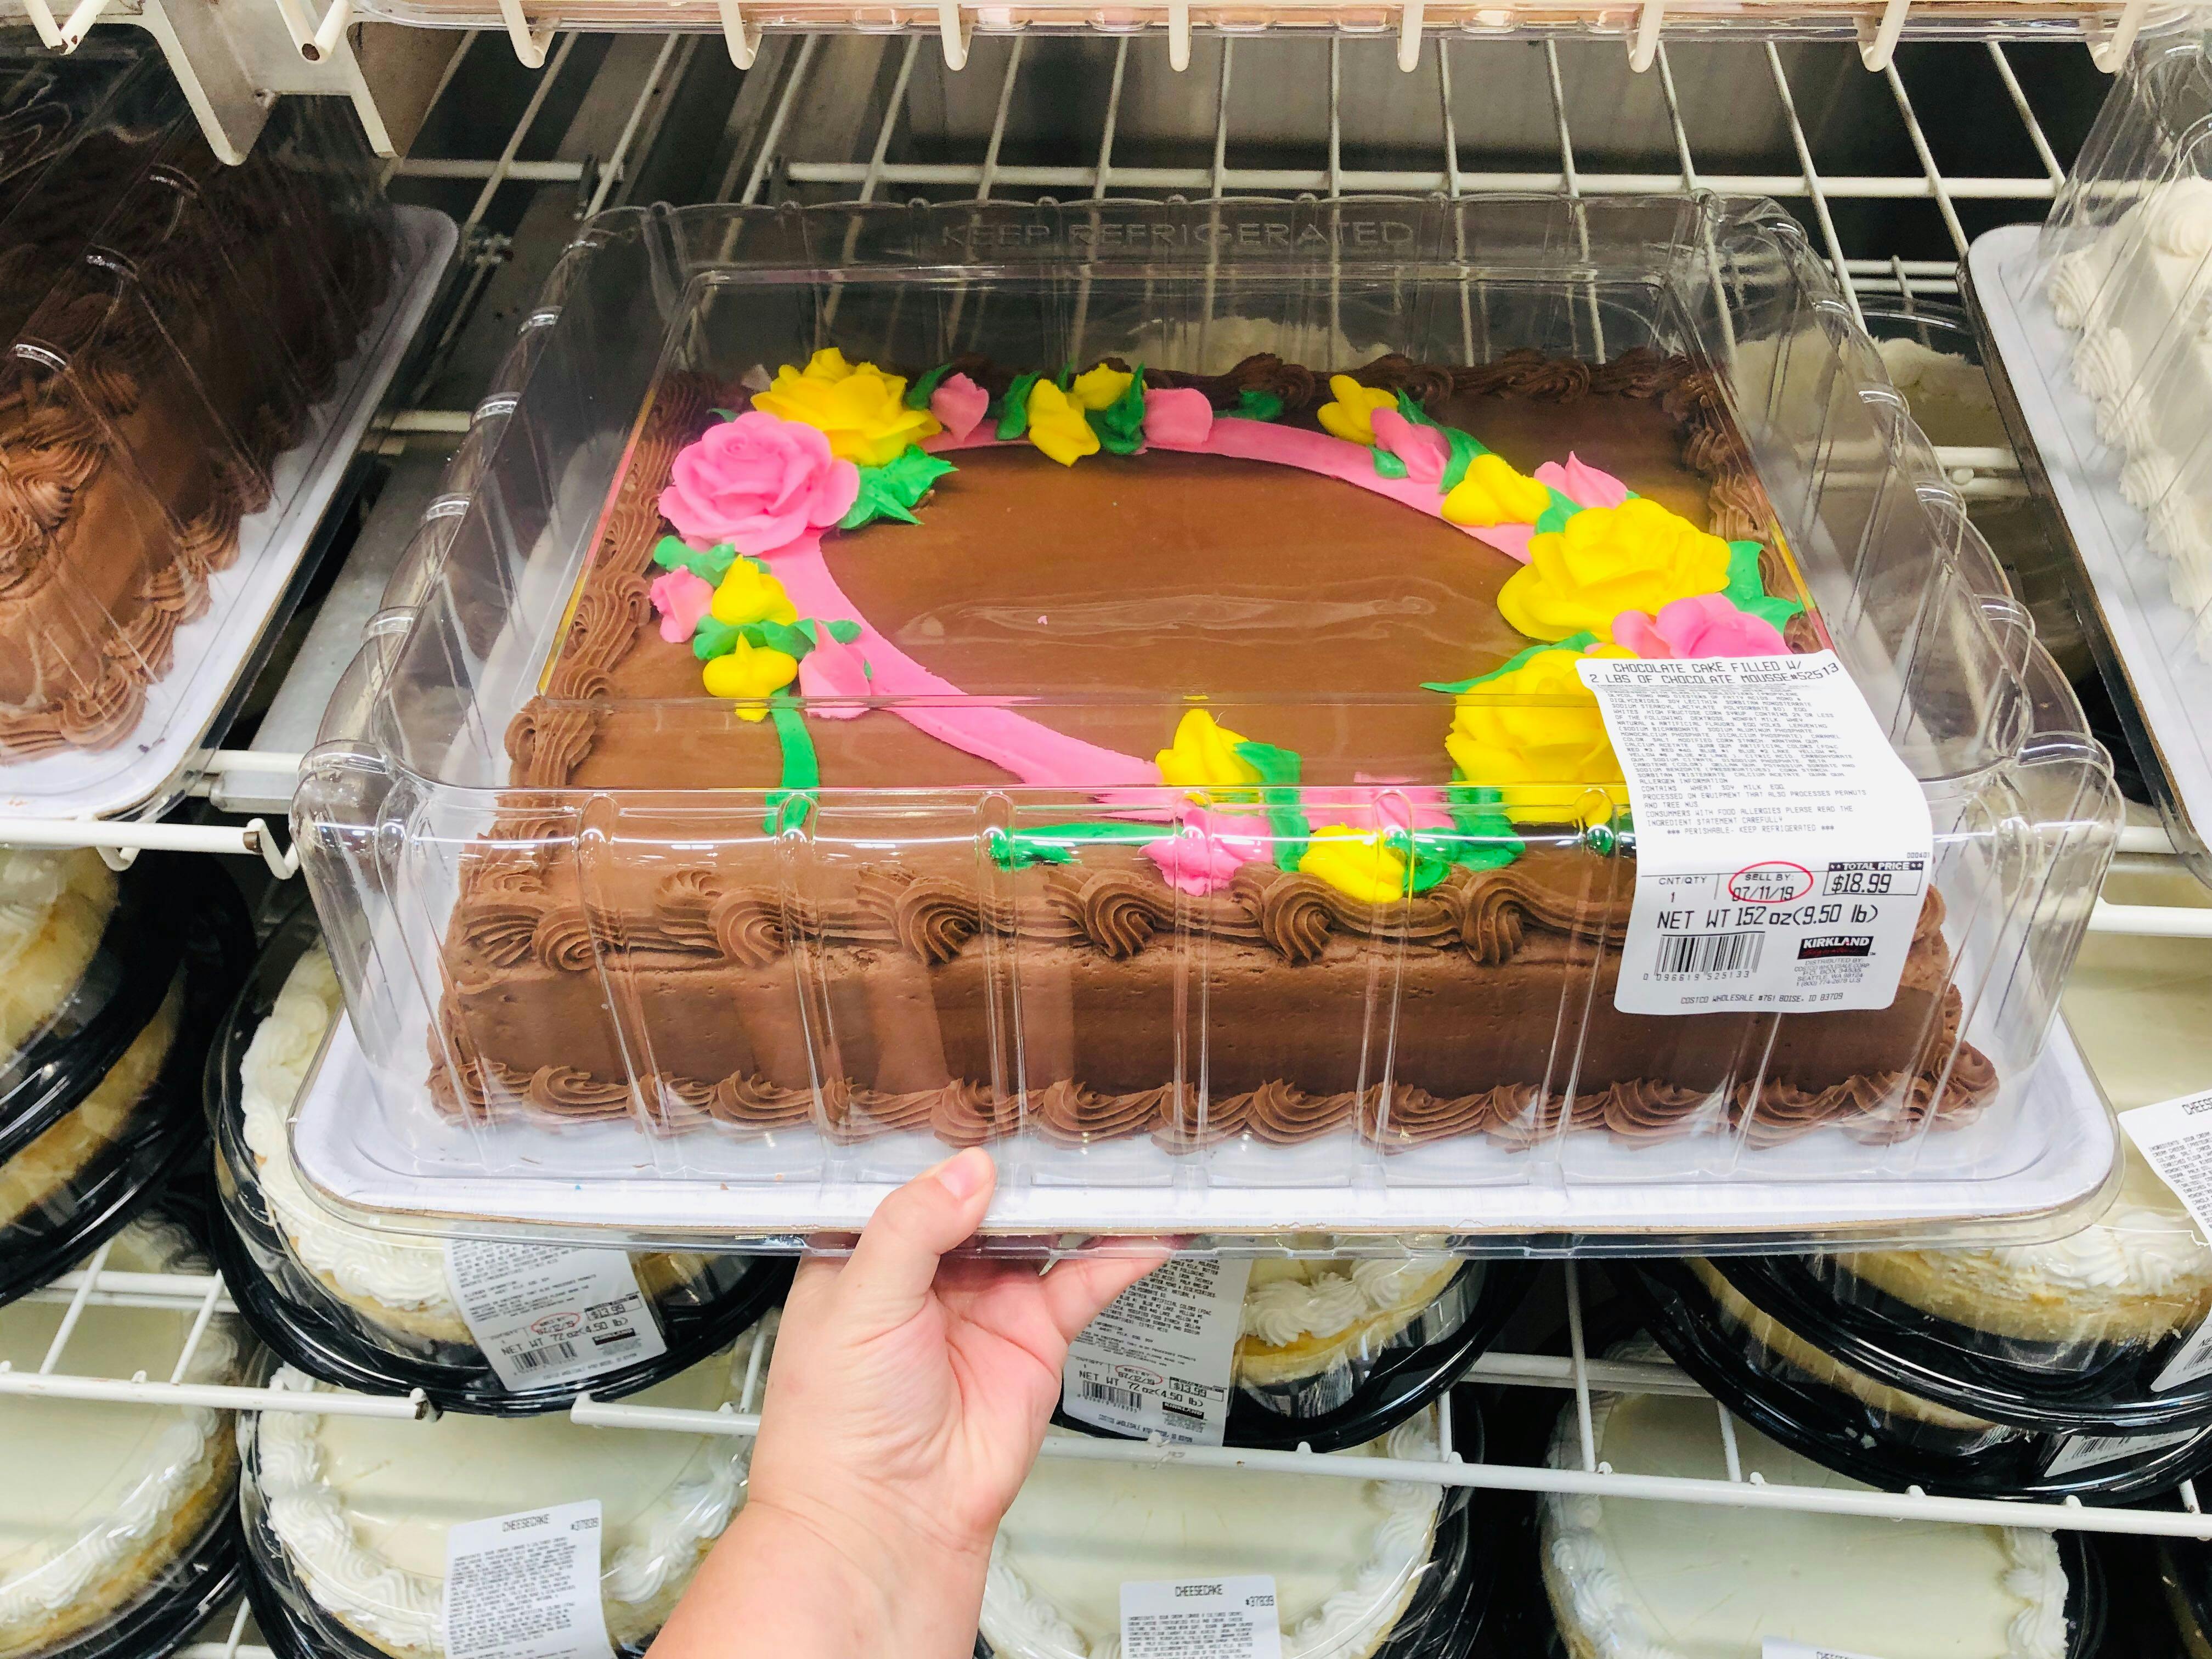 Costco HalfSheet Cakes Aren't On Shelves (But You Can